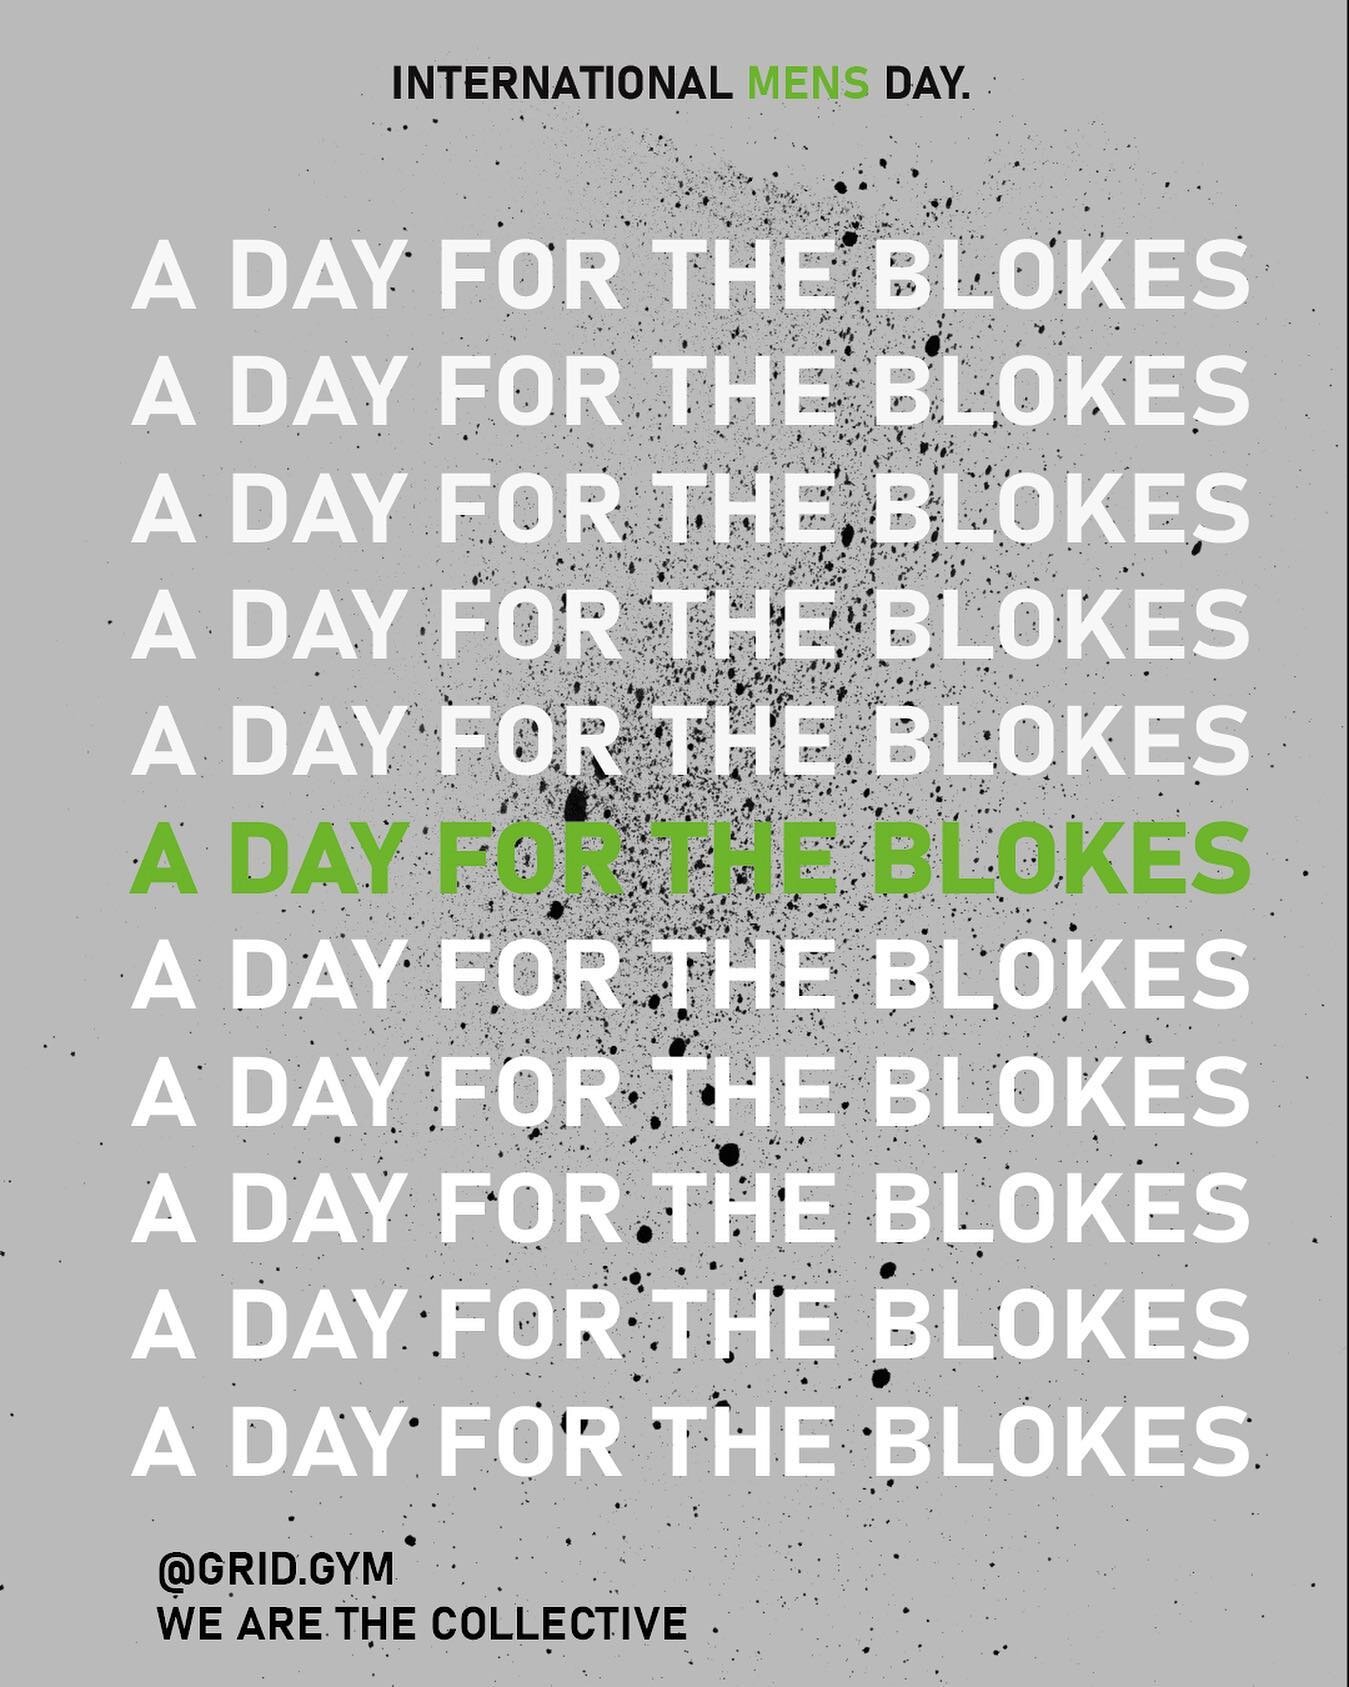 A DAY FOR THE BLOKES 👨🏻👴🏼🧑🏿&zwj;🦱👨🏼&zwj;🦰👱🏼&zwj;♂️👨🏾&zwj;🦳

It's tough being a bloke.

a lot of responsibility,
a lot of burdens
a lot of pressure.

Today is International Men's day, this post is dedicated to all the blokes. Every colo